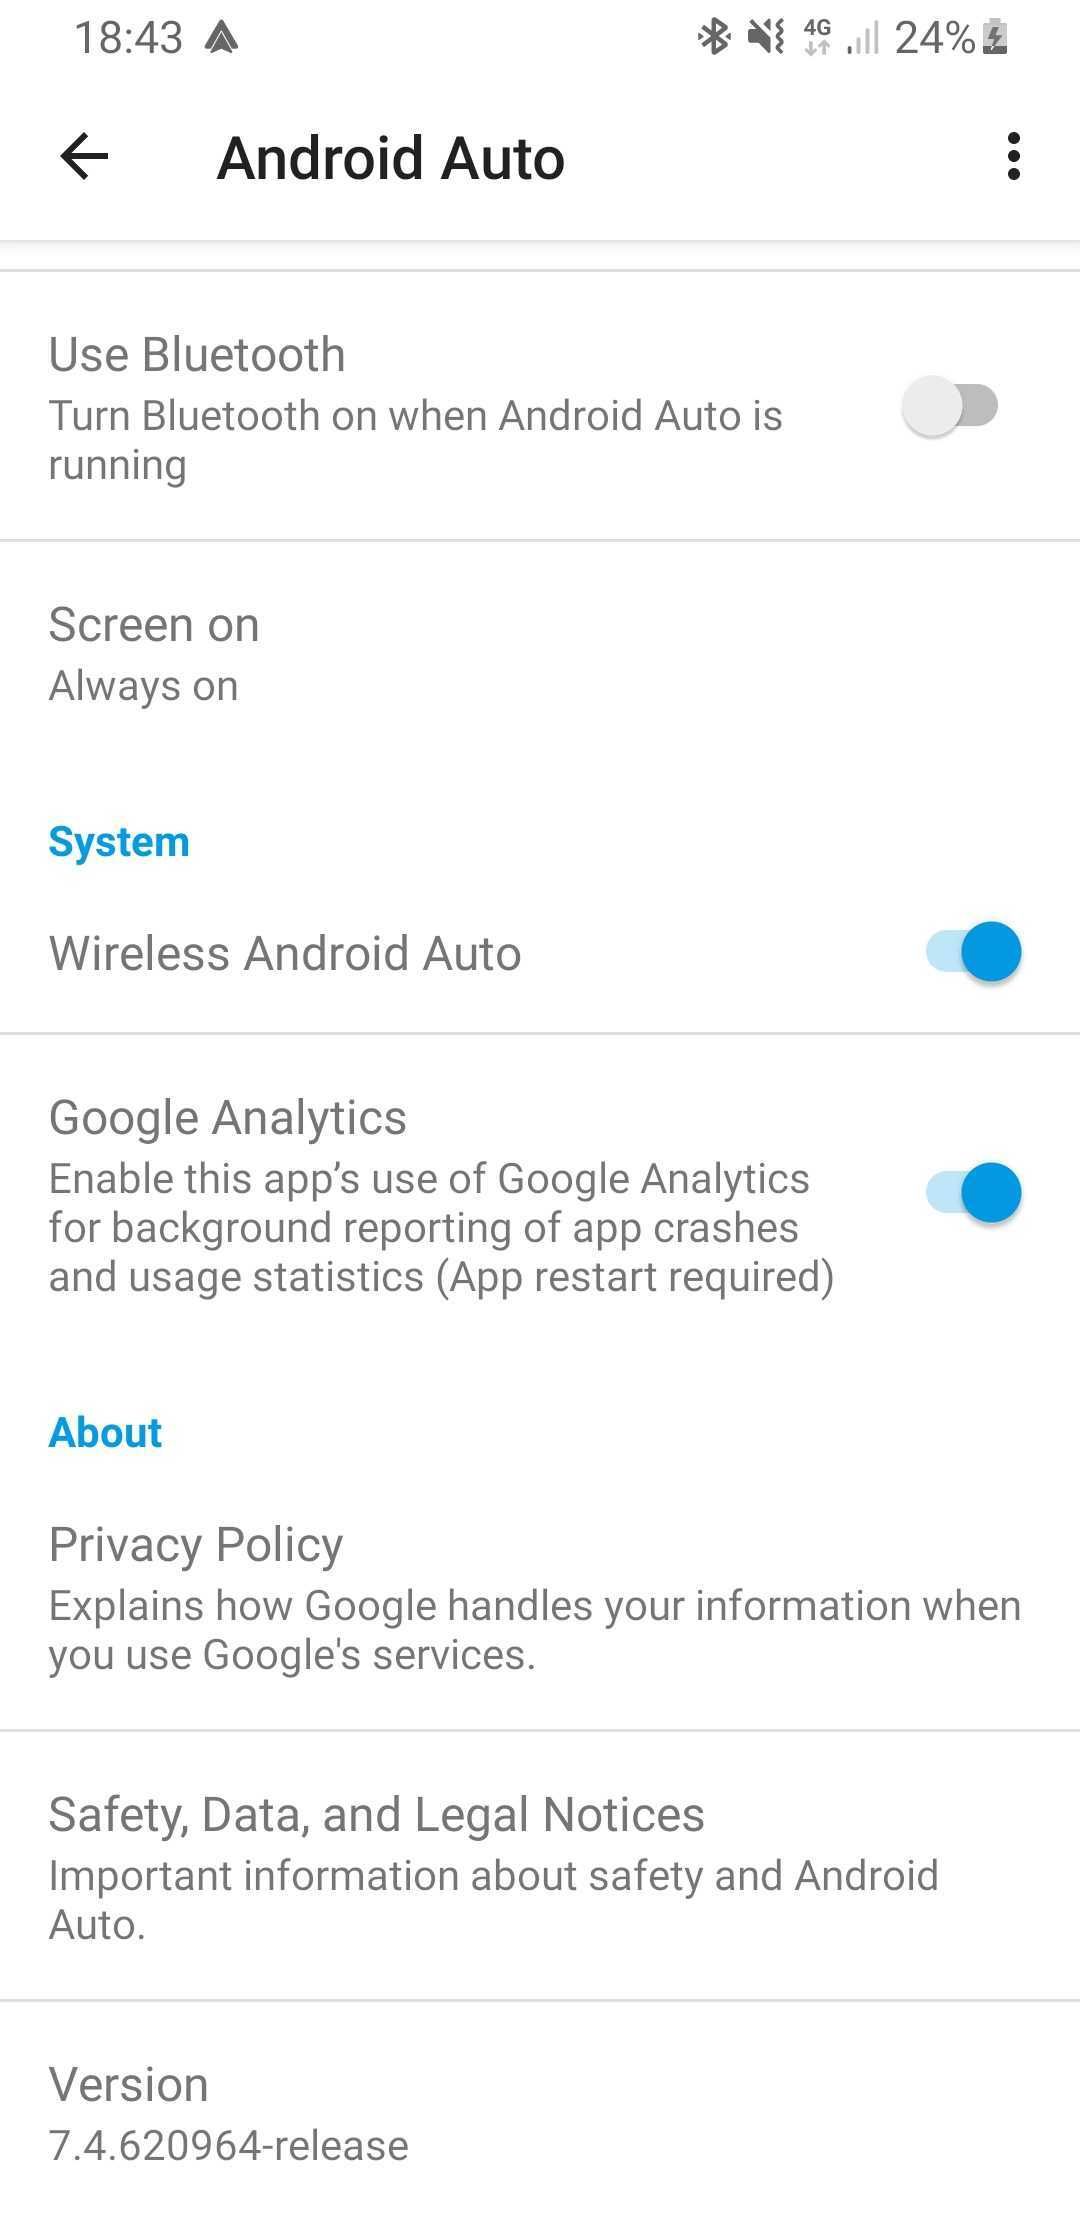 A screenshot of the Android Auto settings